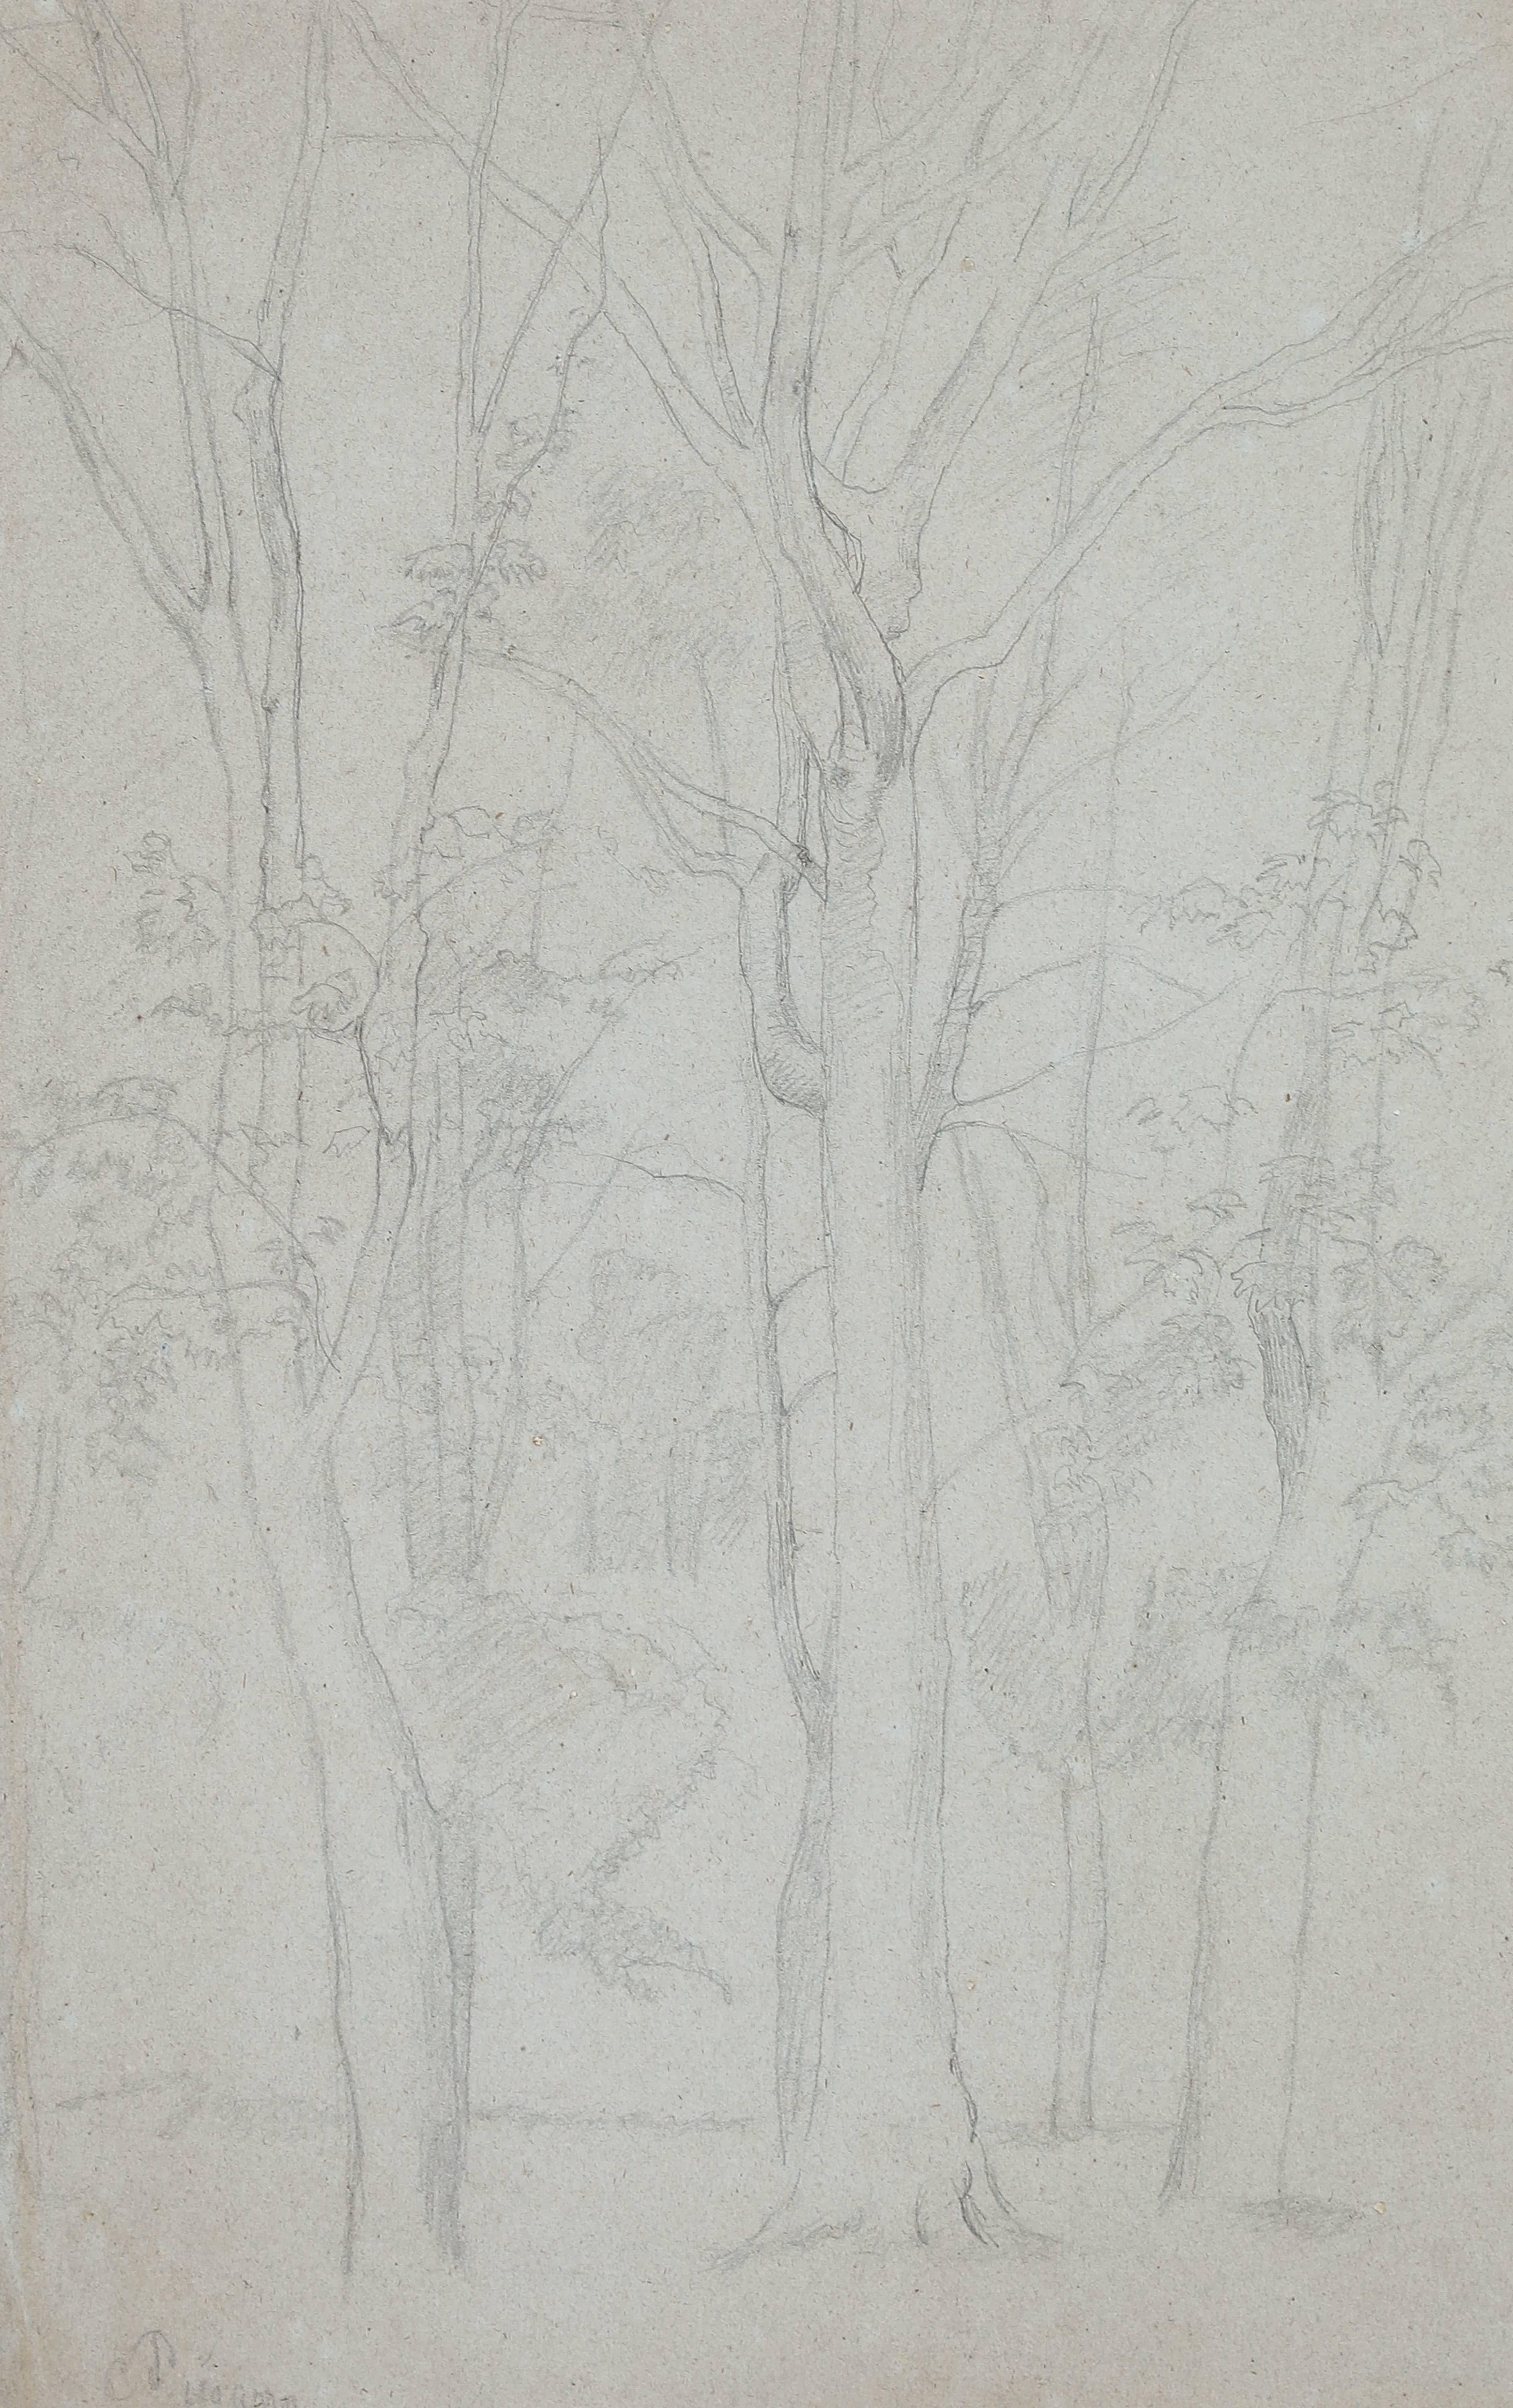 Arbres by Camille Pissarro - Pencil on paper